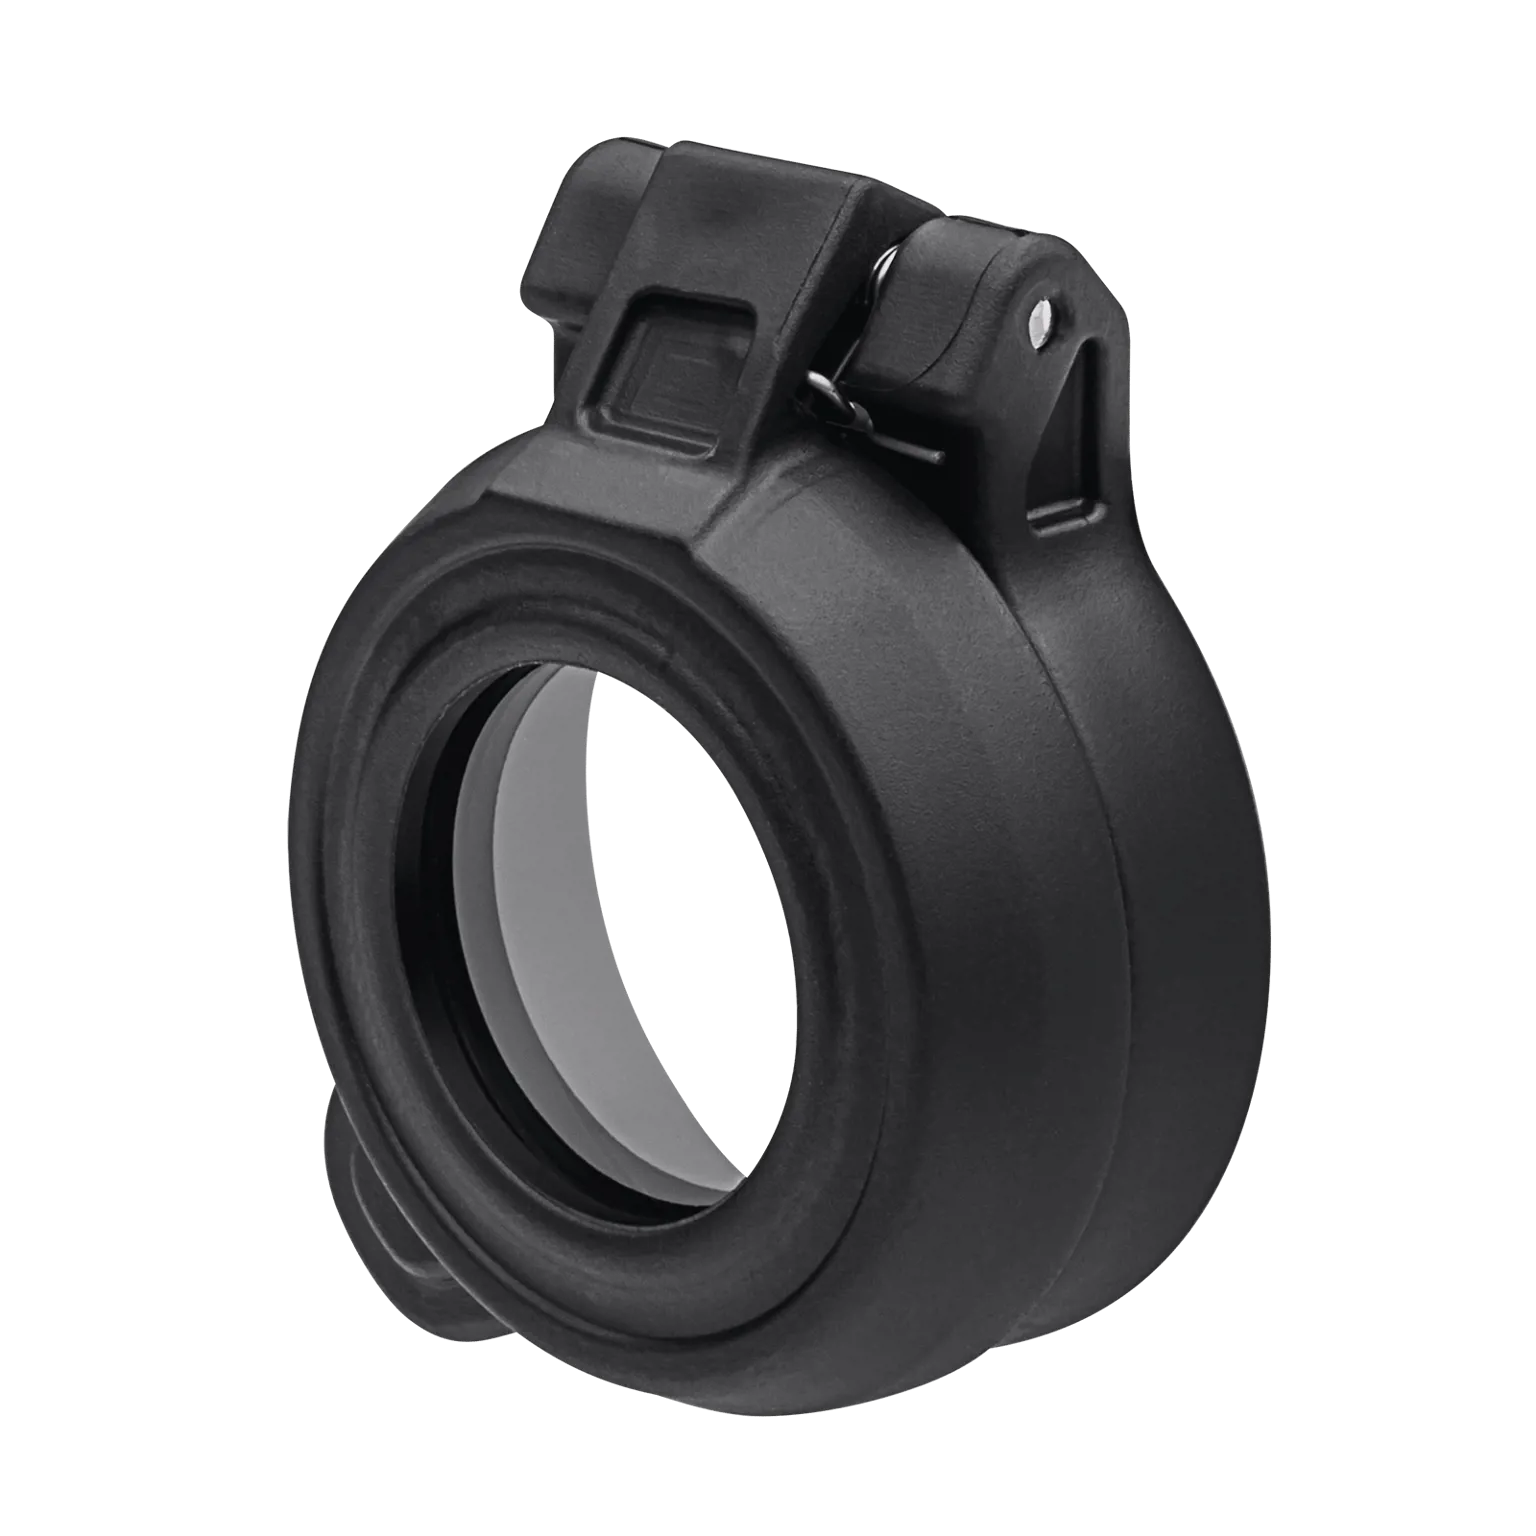 Lens cover flip-up - Rear Transparent for Comp™ series 30 mm sights - 1